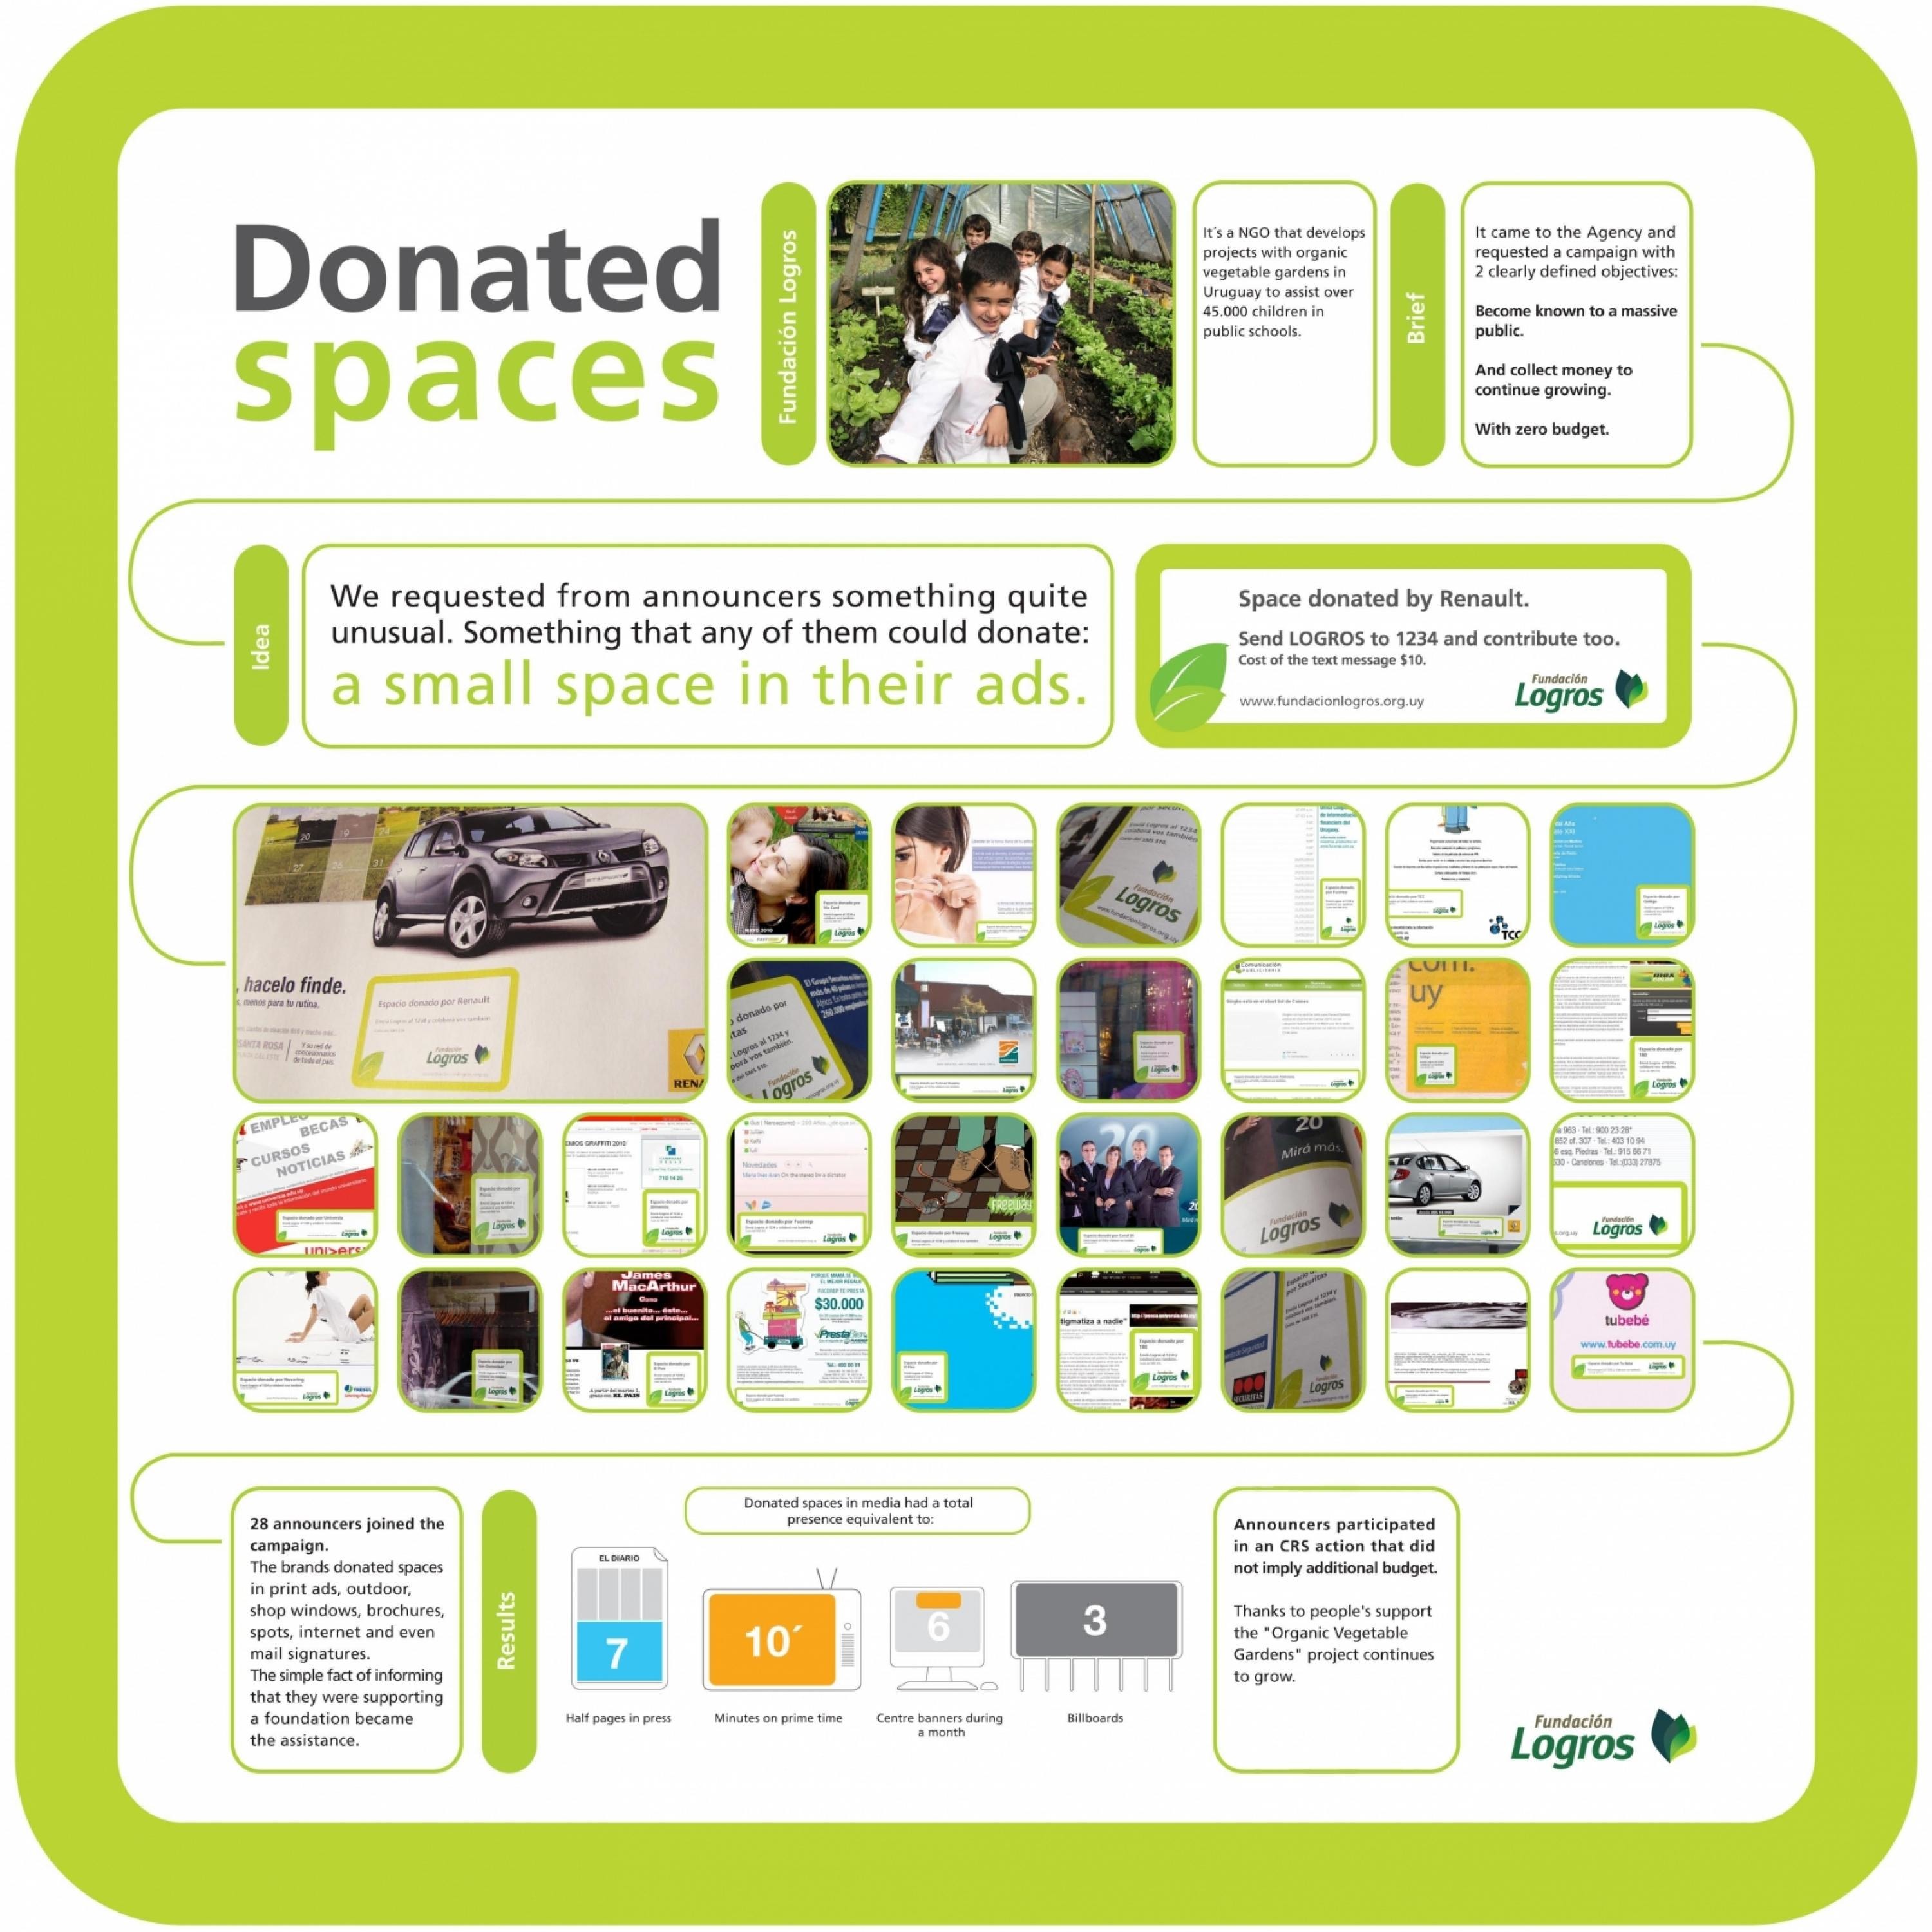 DONATED SPACES